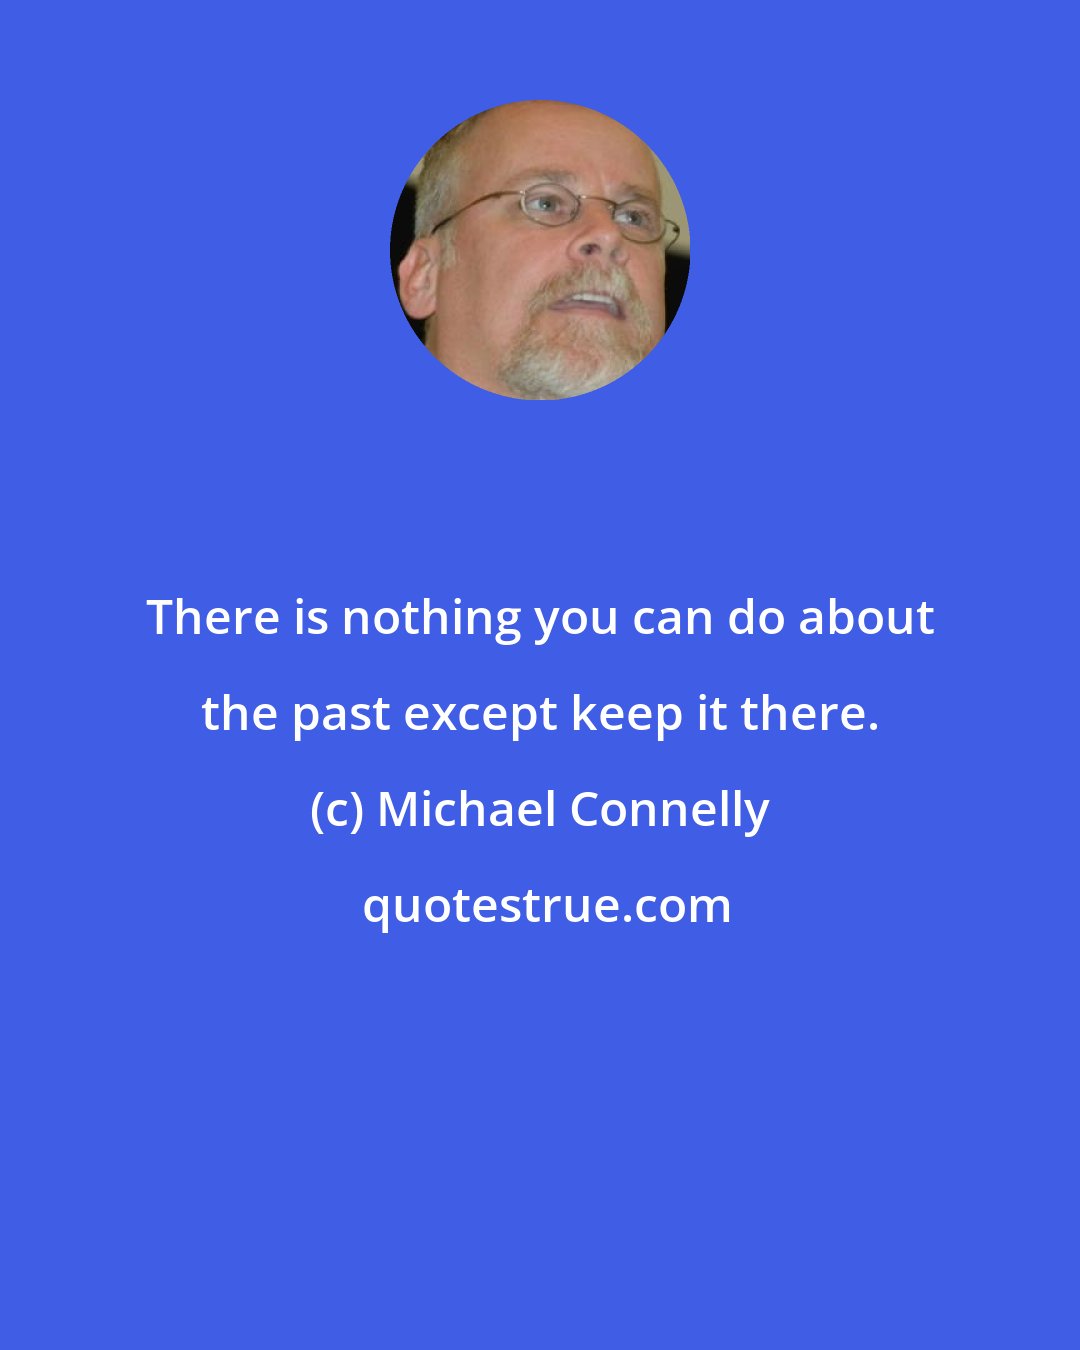 Michael Connelly: There is nothing you can do about the past except keep it there.